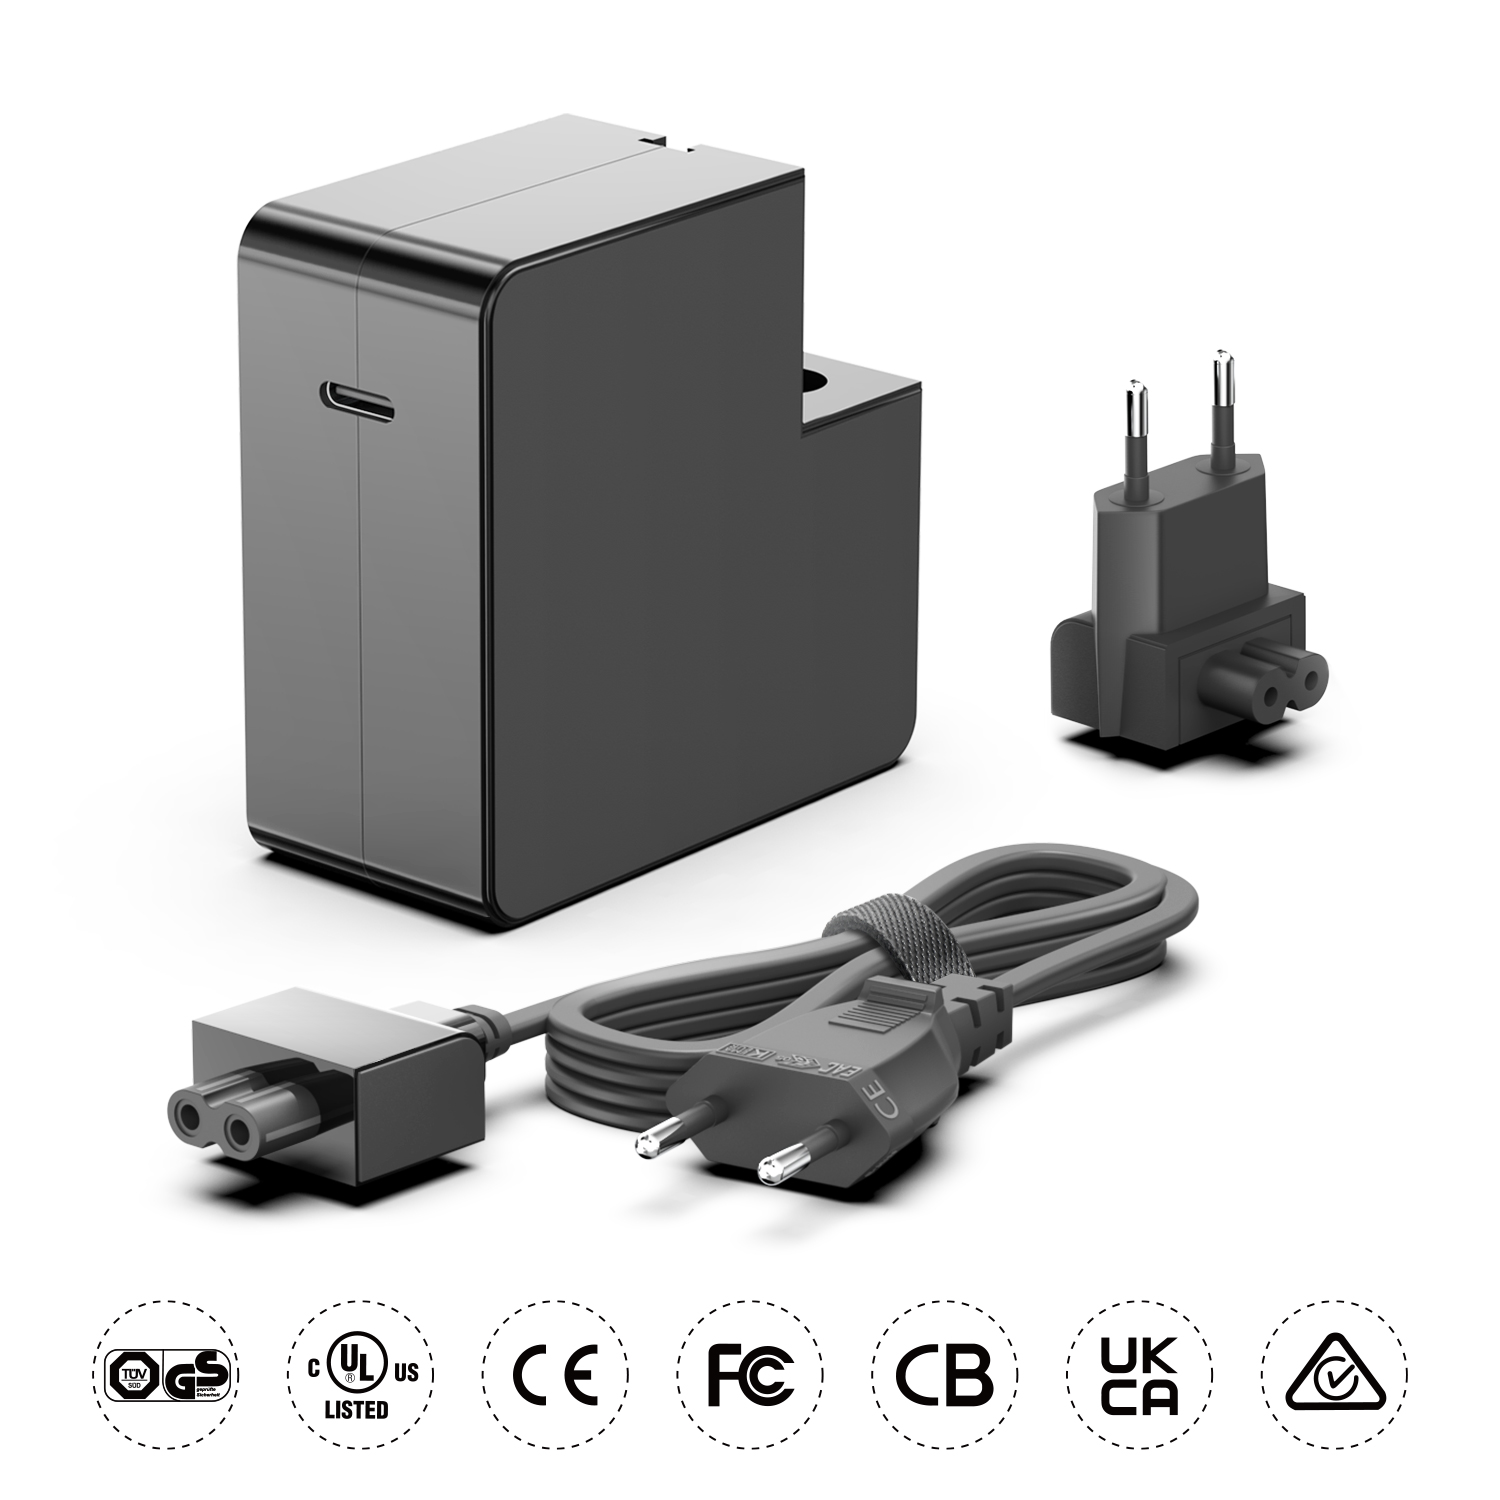 Detachable 65W USB C PD Power Adapter with Interchangeabl Plugs